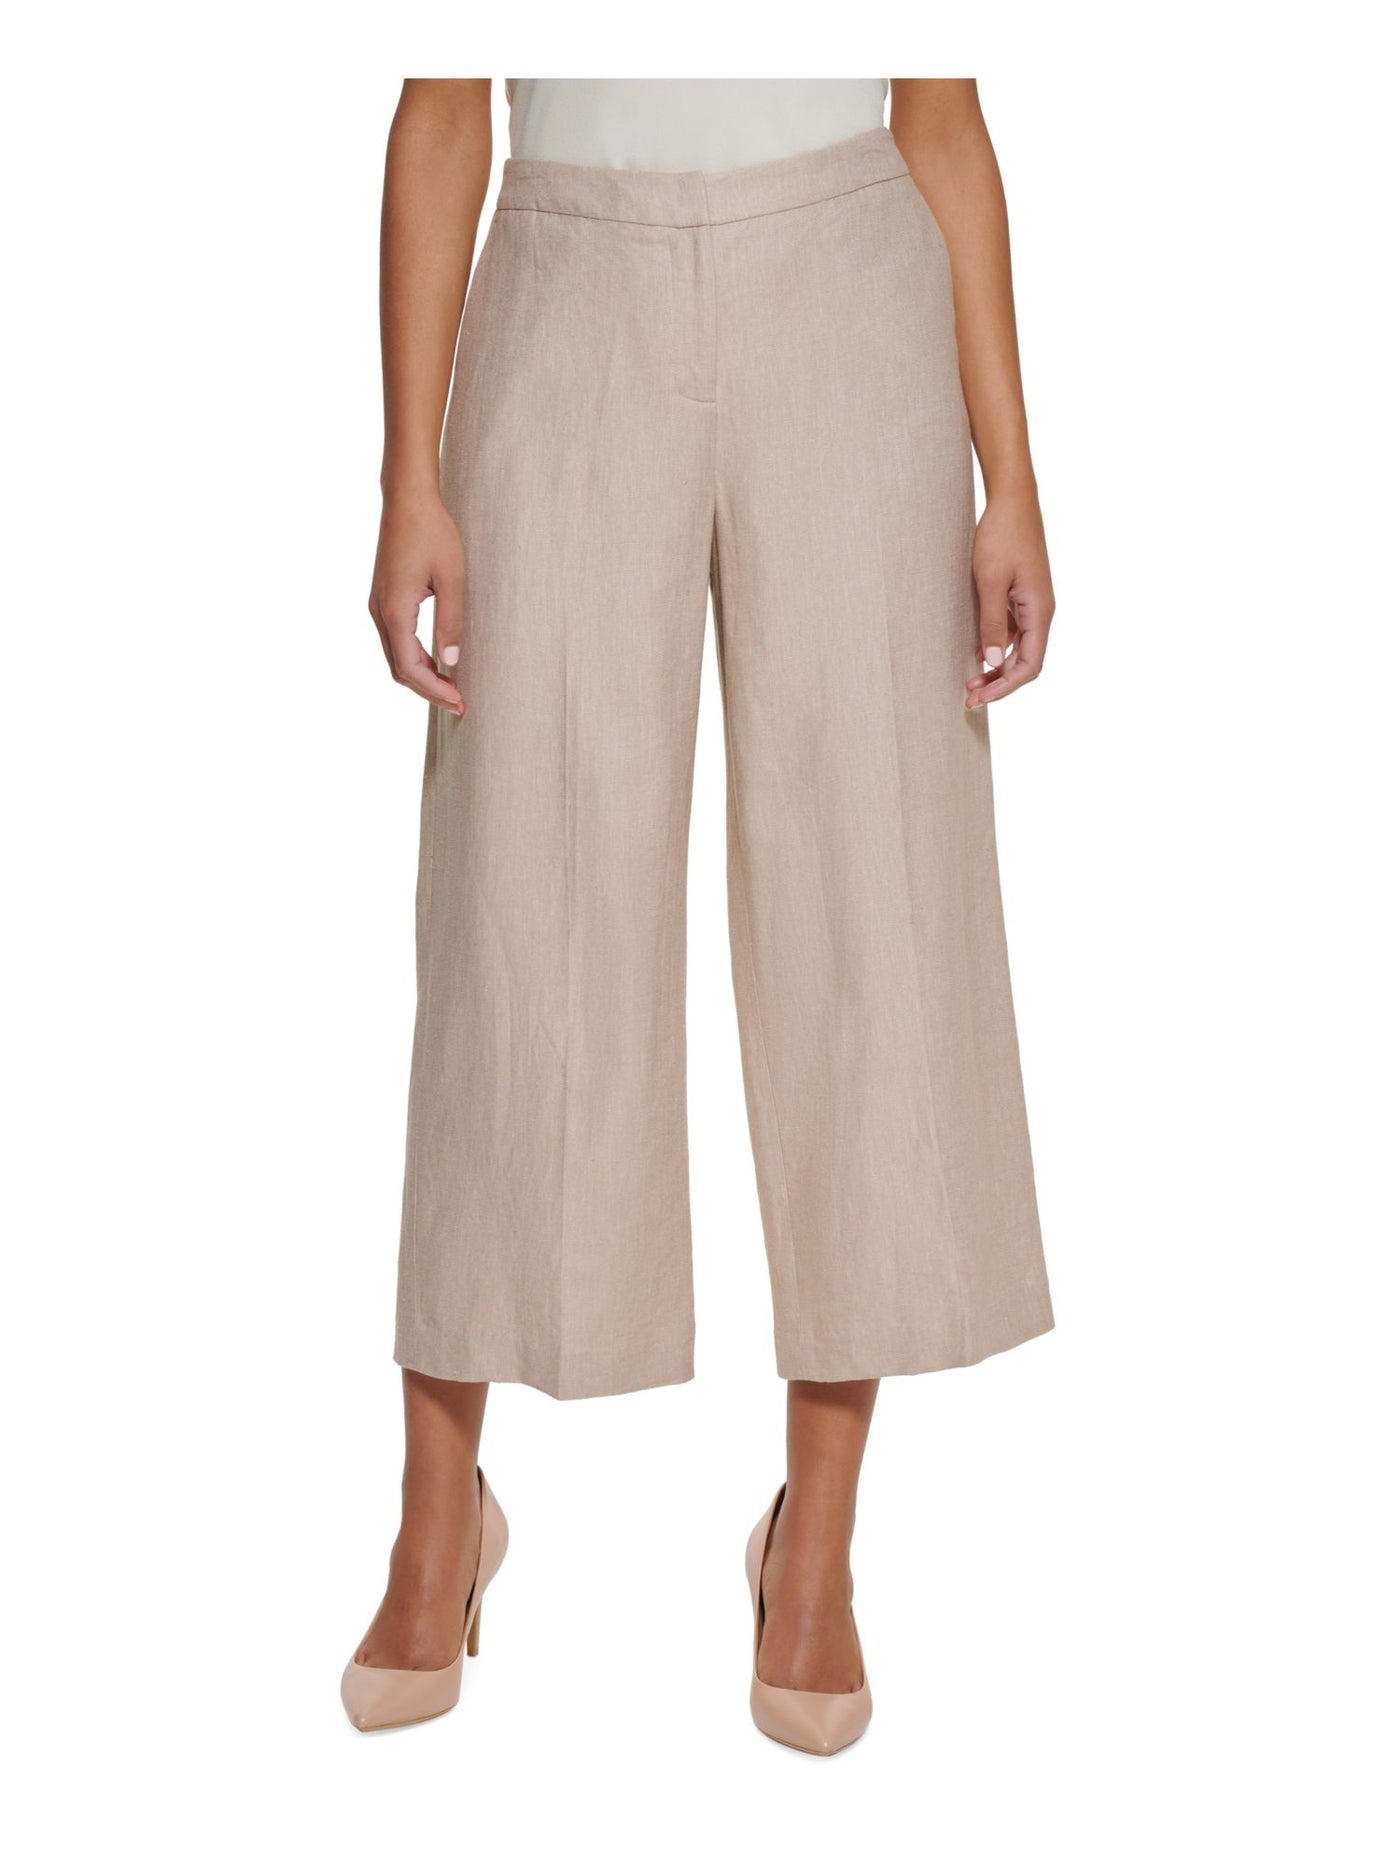 CALVIN KLEIN Womens Beige Zippered Pocketed Cropped Heather Wear To Work Wide Leg Pants Petites 14P